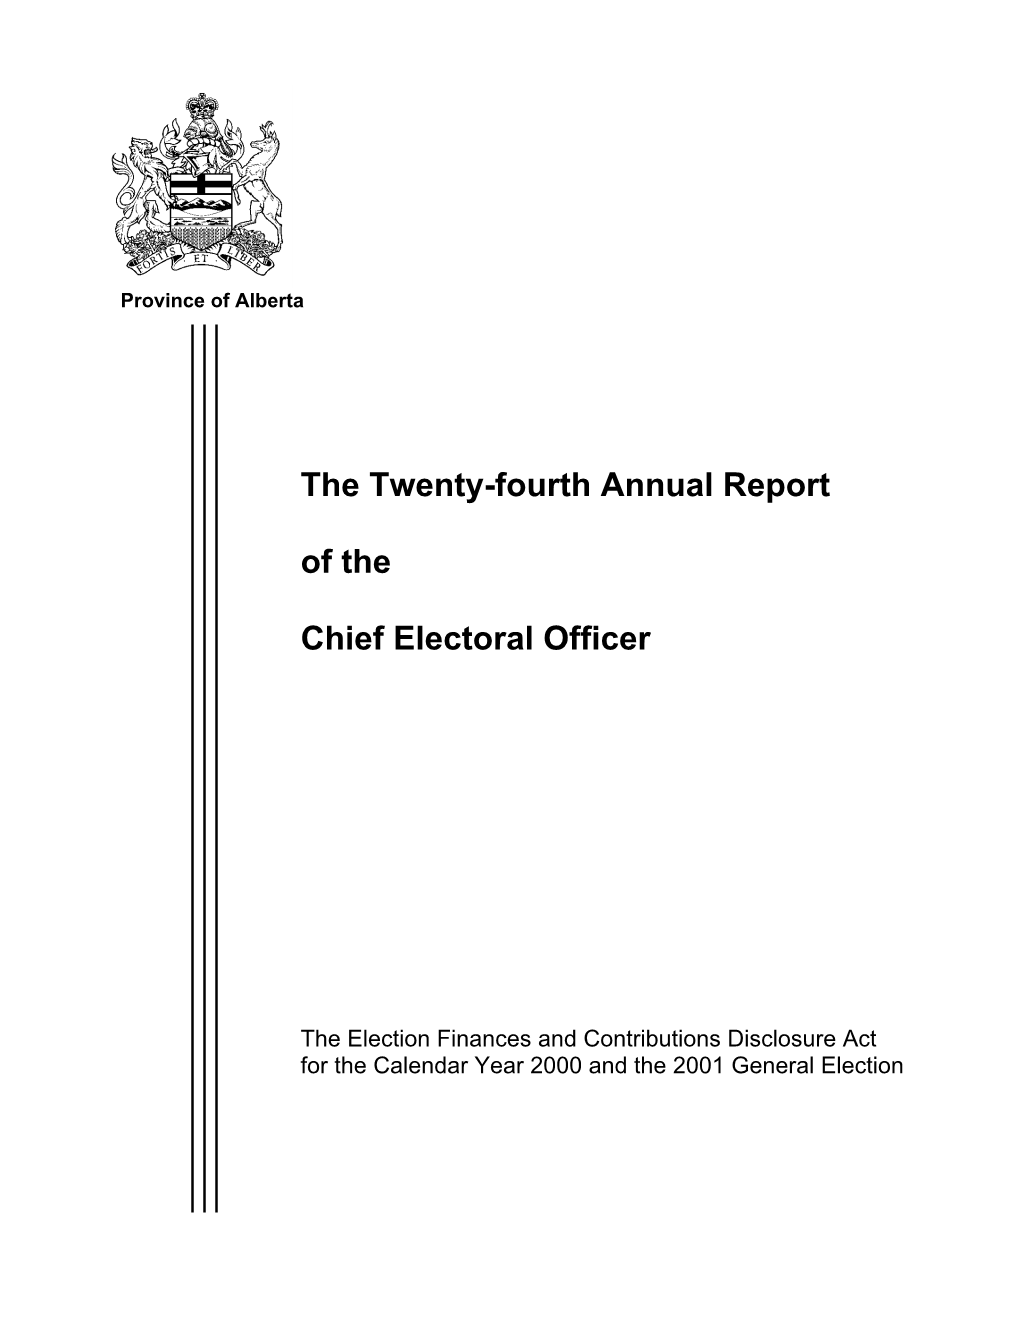 The Twenty-Fourth Annual Report of the Chief Electoral Officer